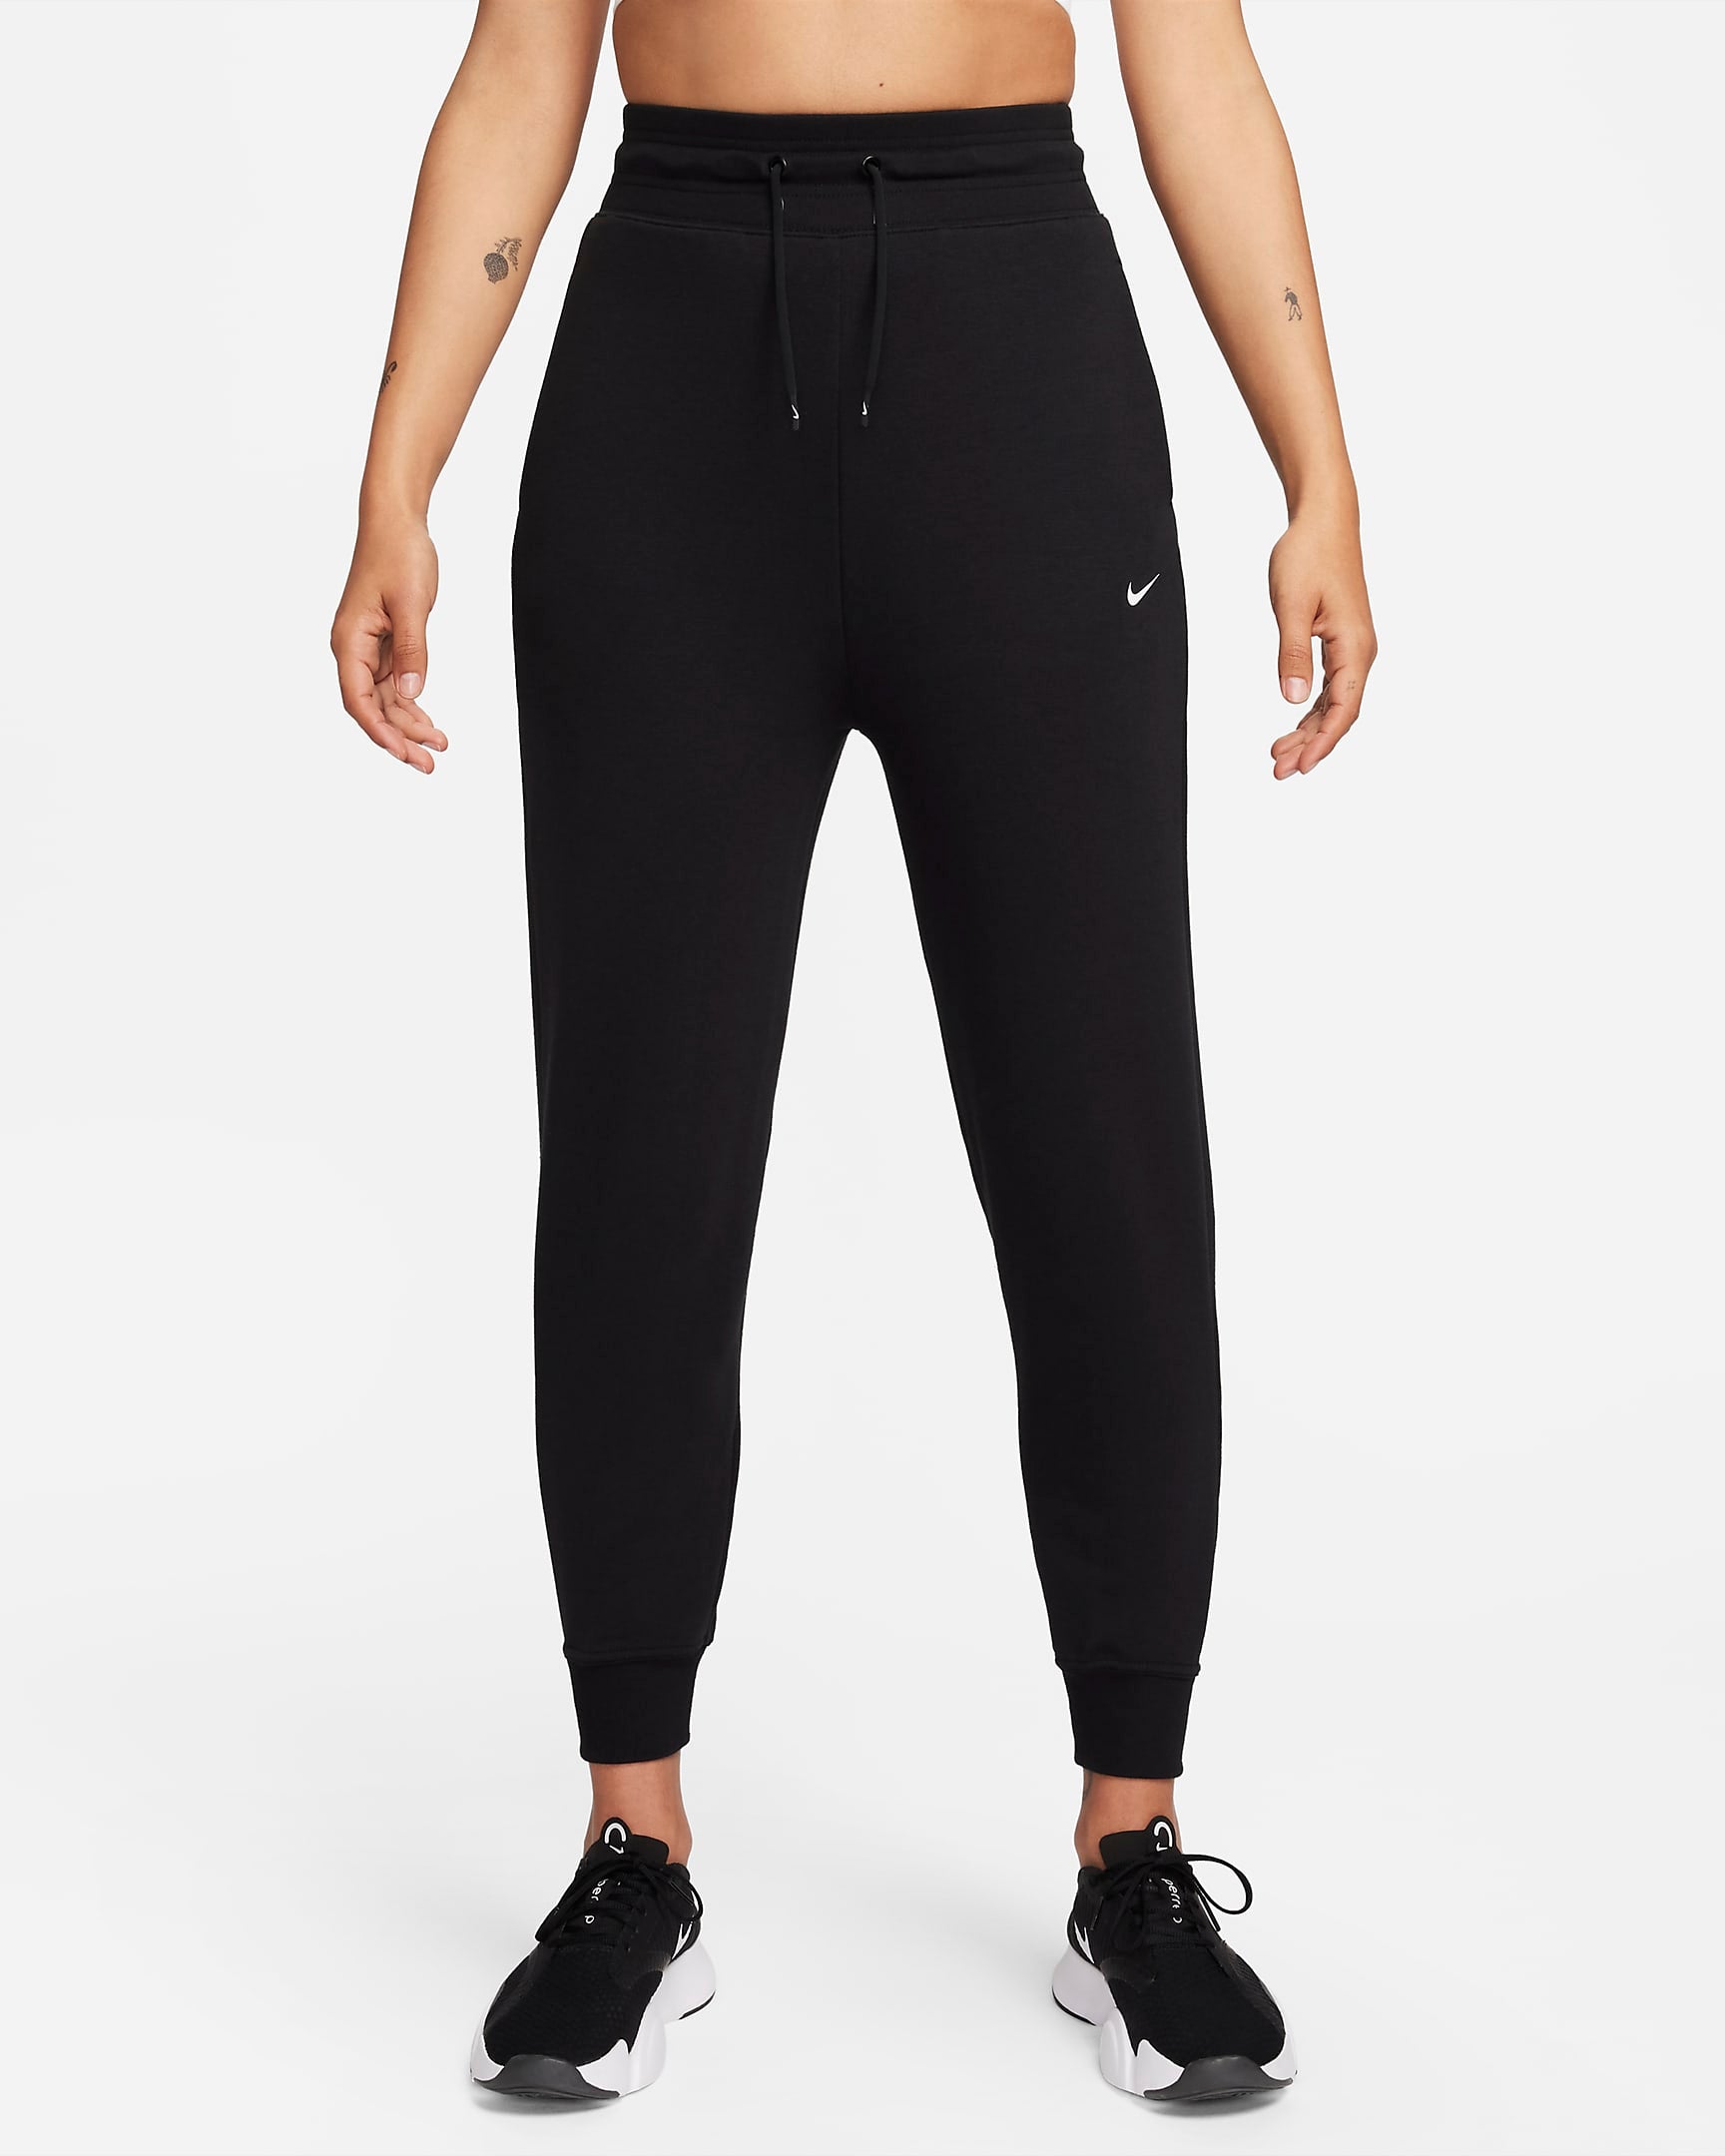 Women's High-Waisted 7/8 French Terry Joggers - FB5434 – The Sports Center